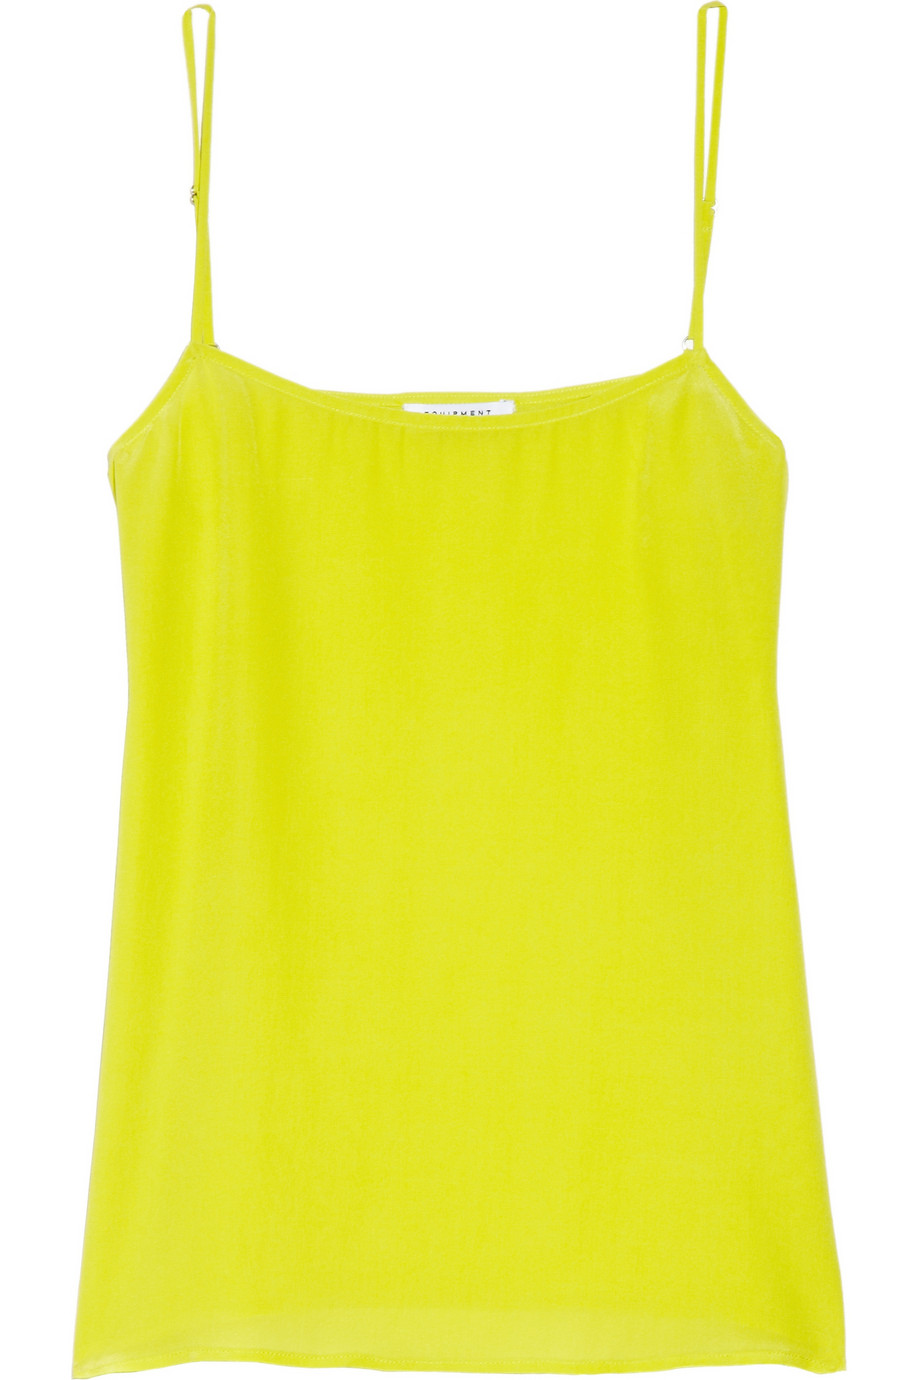 Equipment Washed Silk Camisole in Yellow (chartreuse) | Lyst